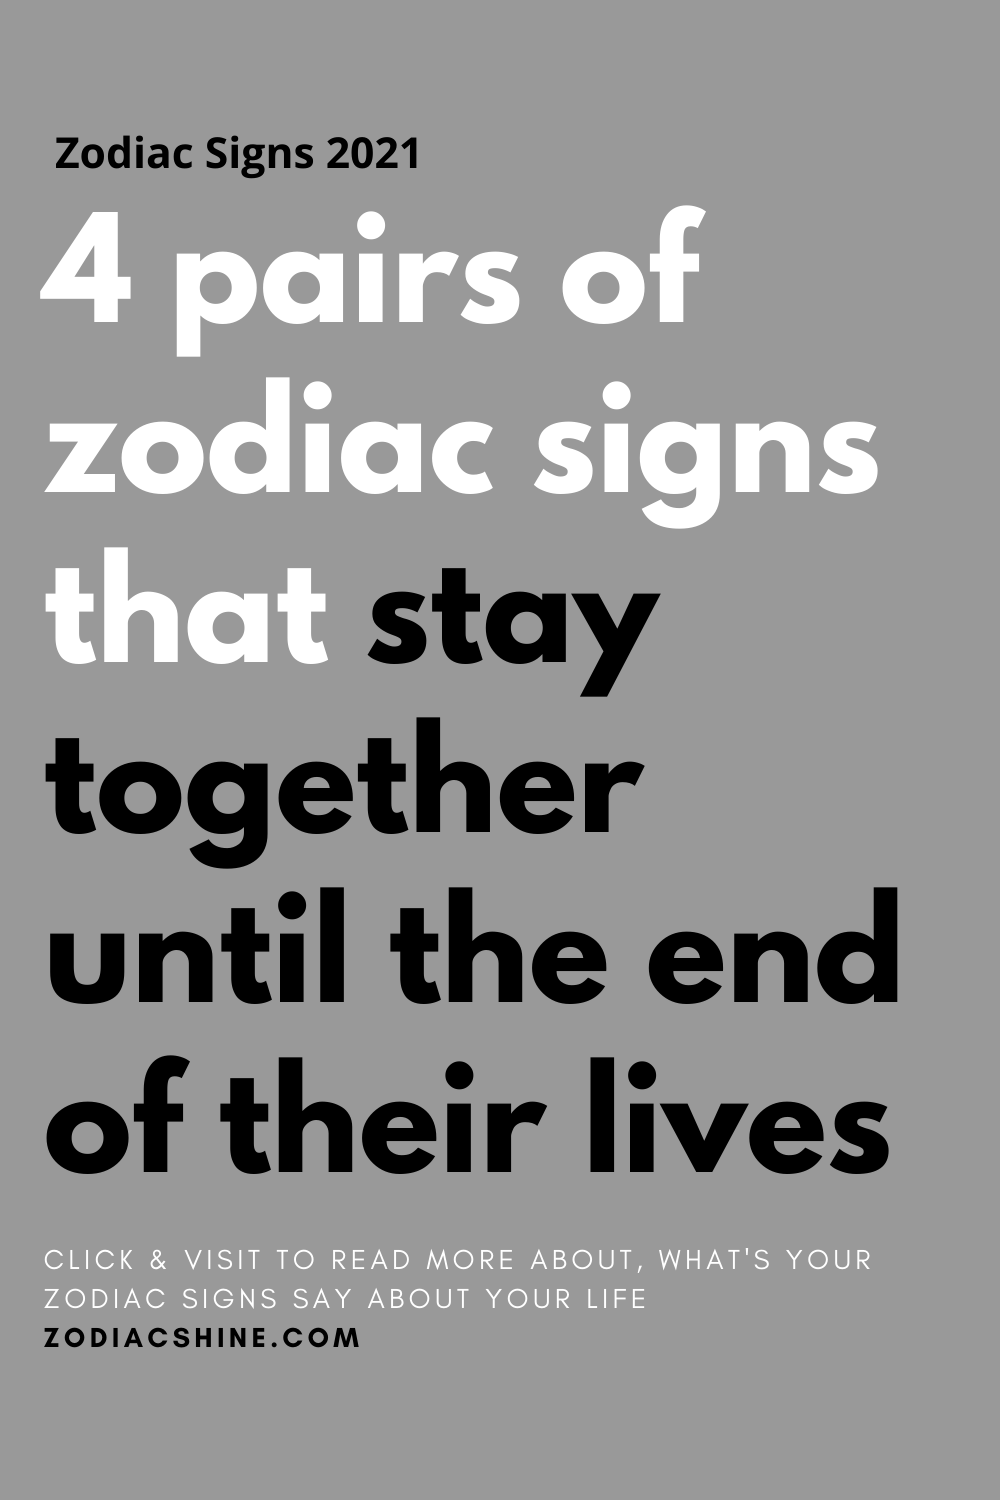 4 pairs of zodiac signs that stay together until the end of their lives